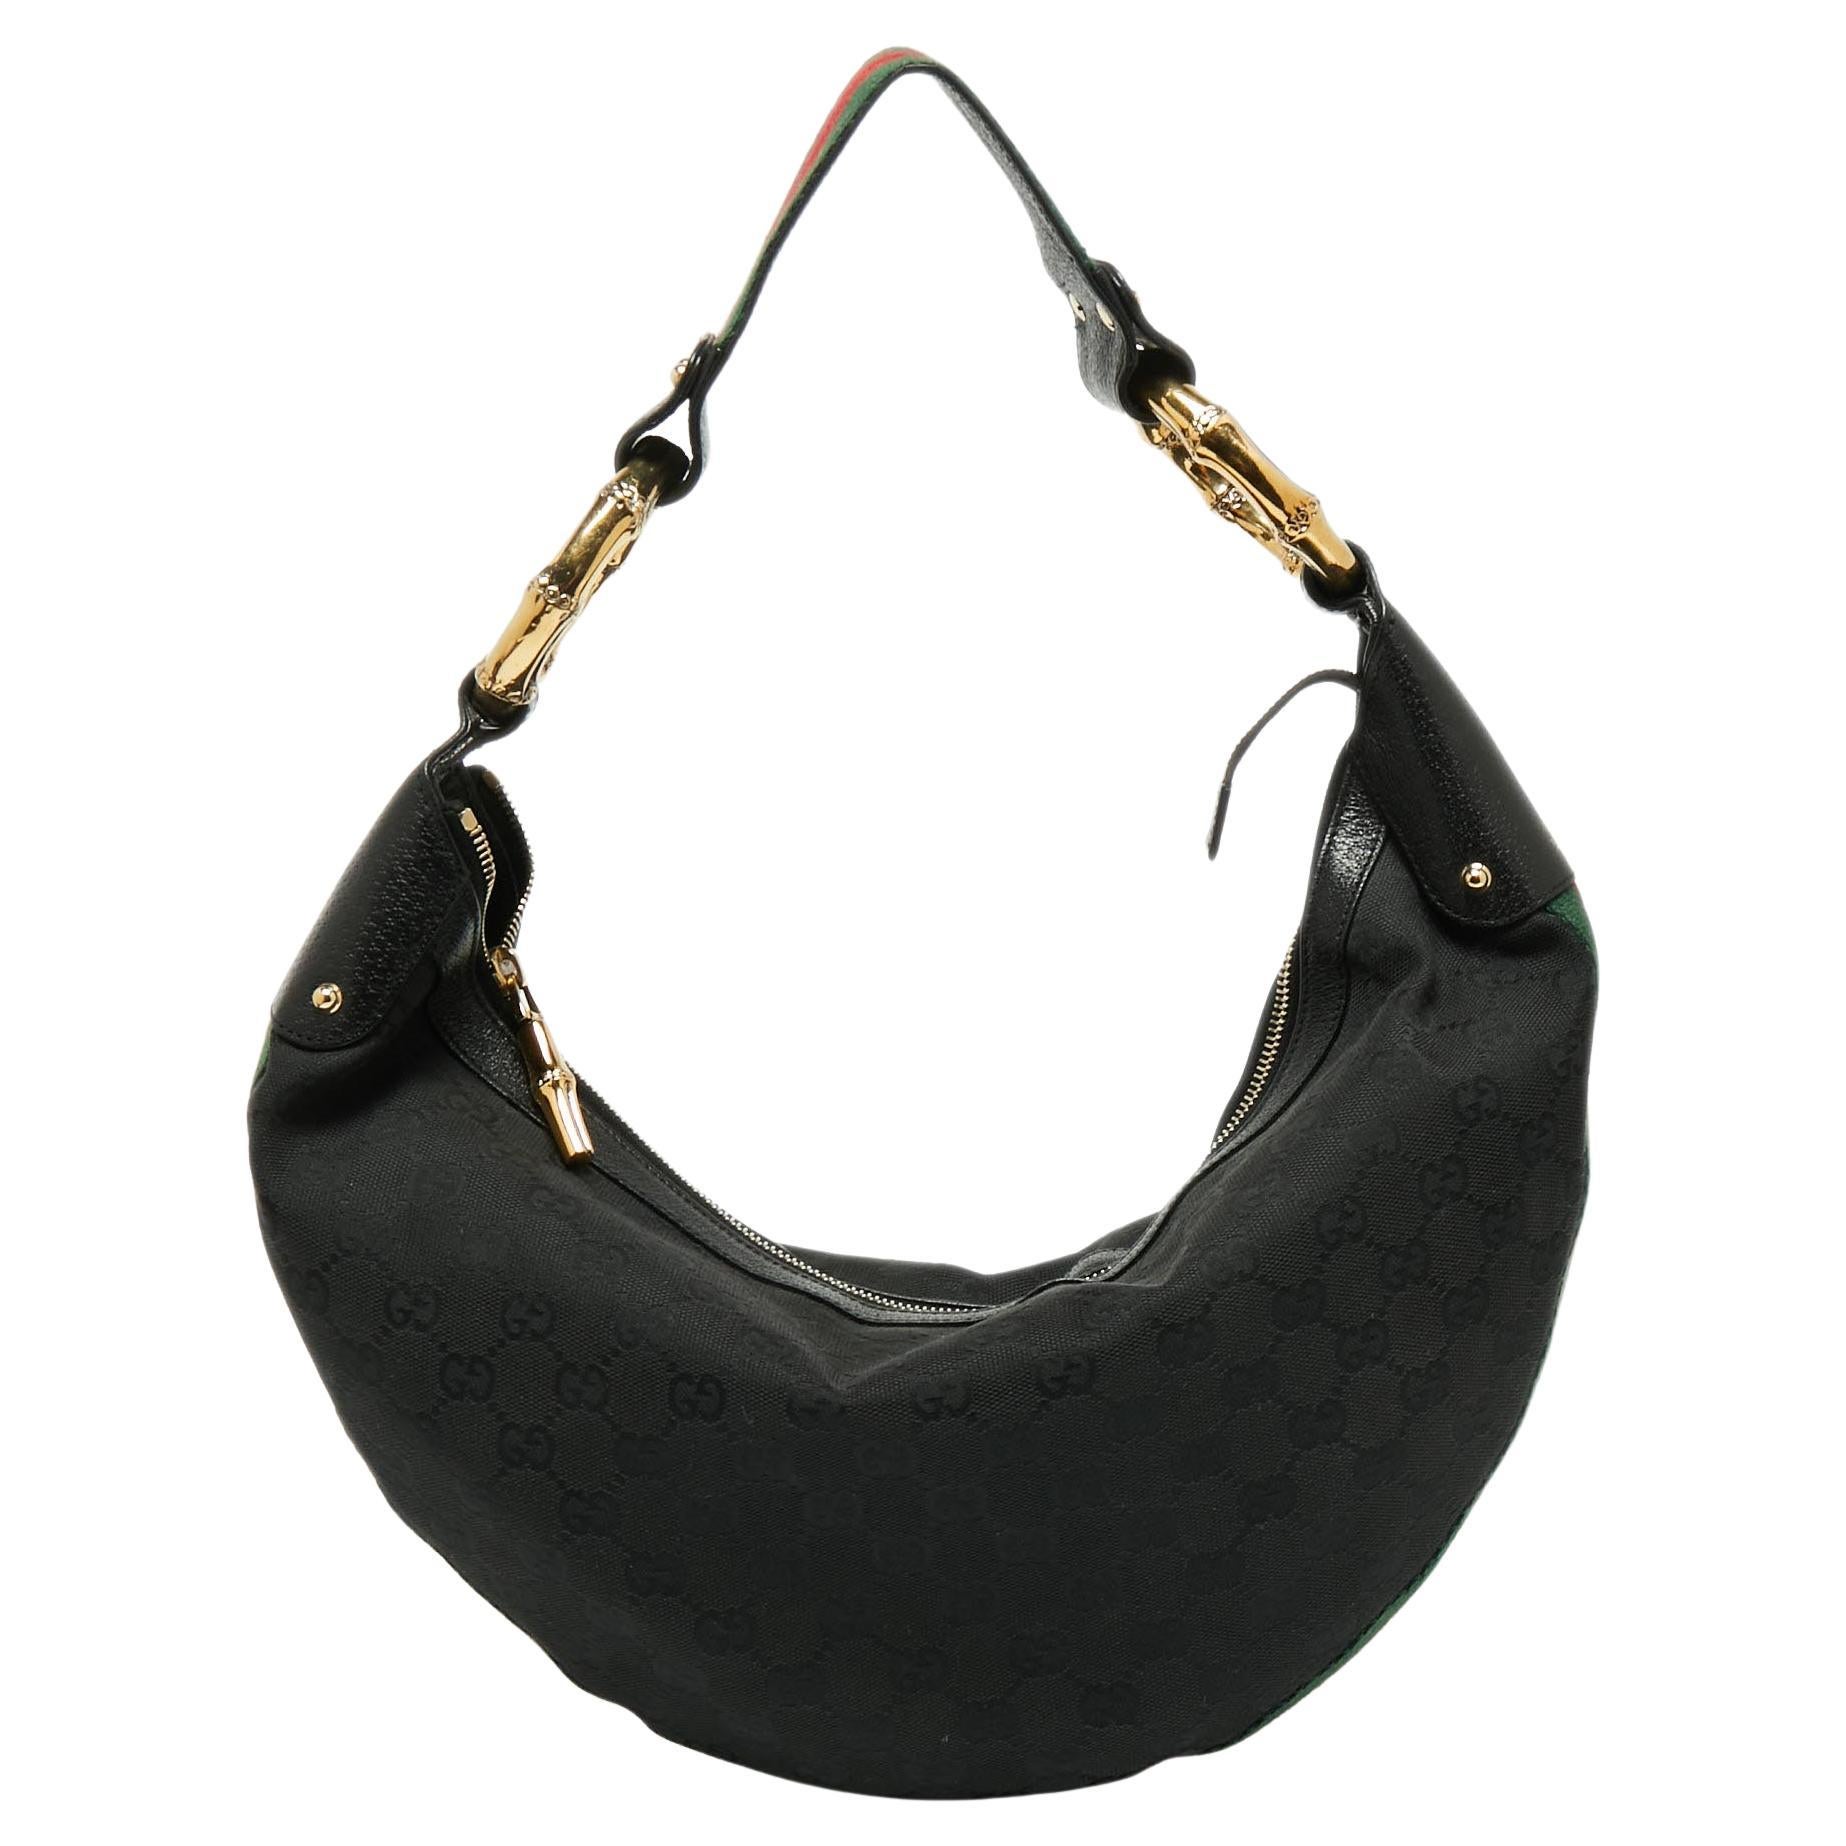 Gucci Black GG Canvas and Leather Medium Web Bamboo Ring Hobo